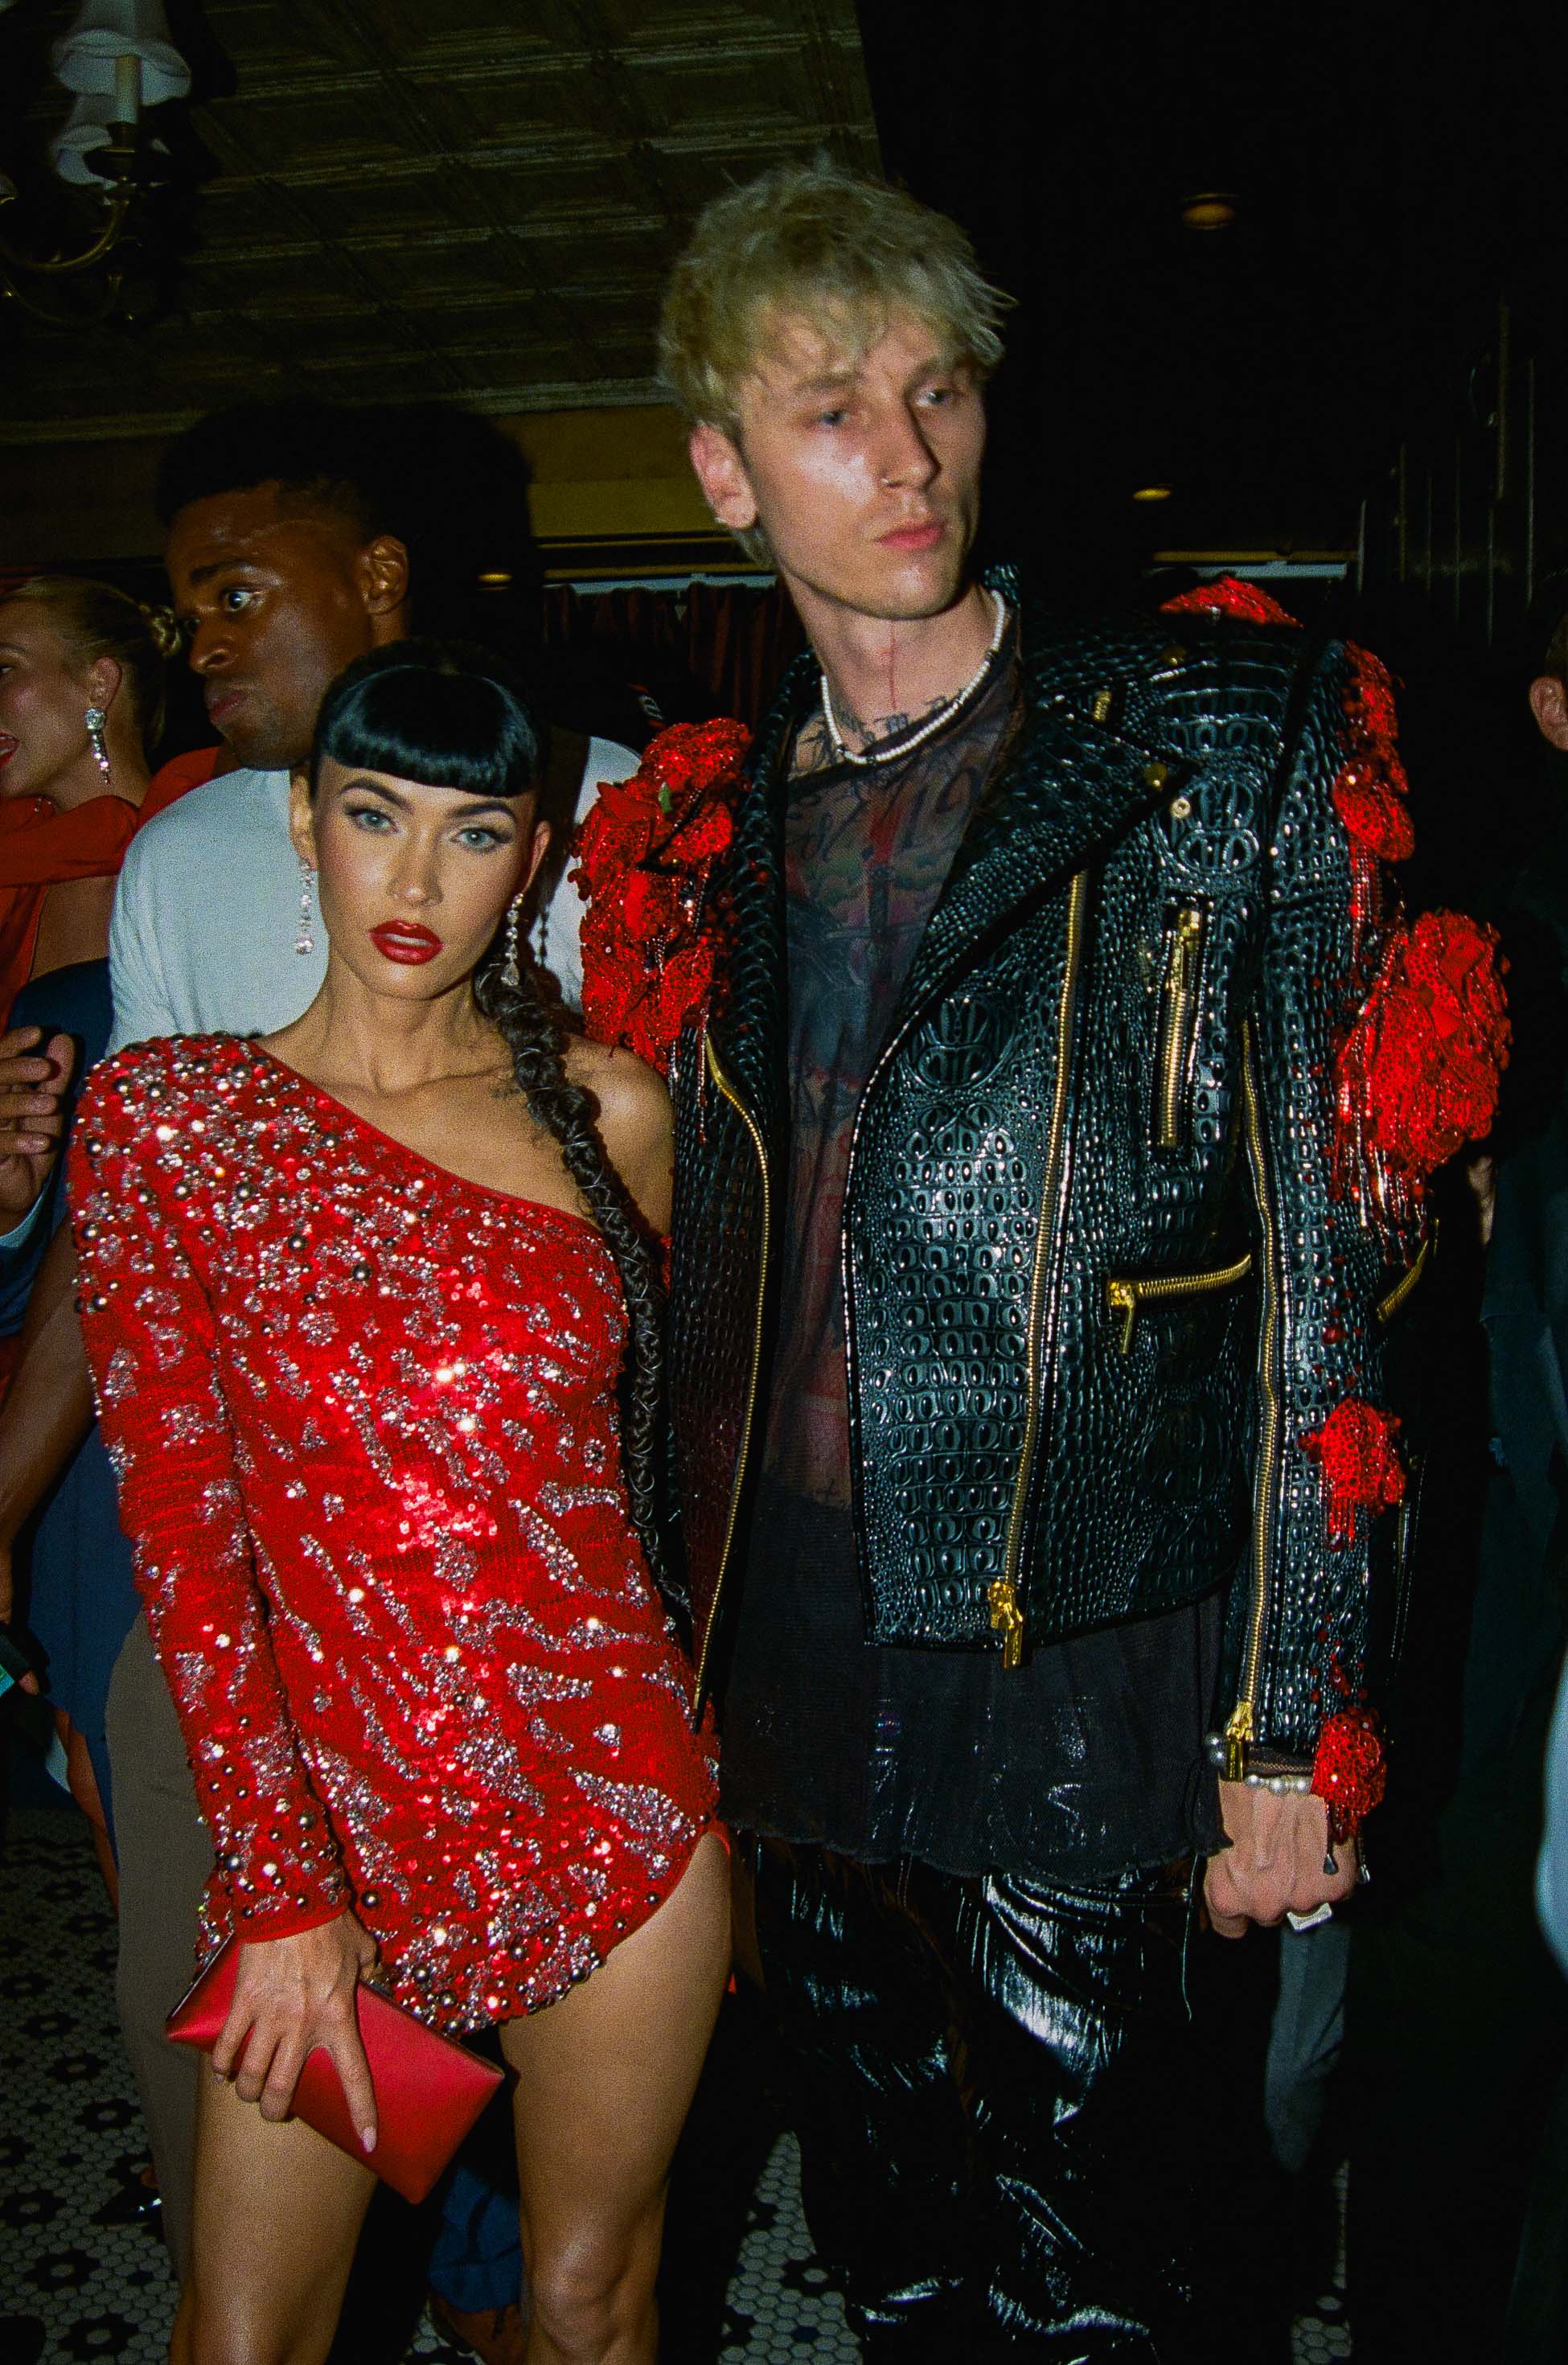 Exclusive: Photos from Virgil Abloh's Met Gala afterparty